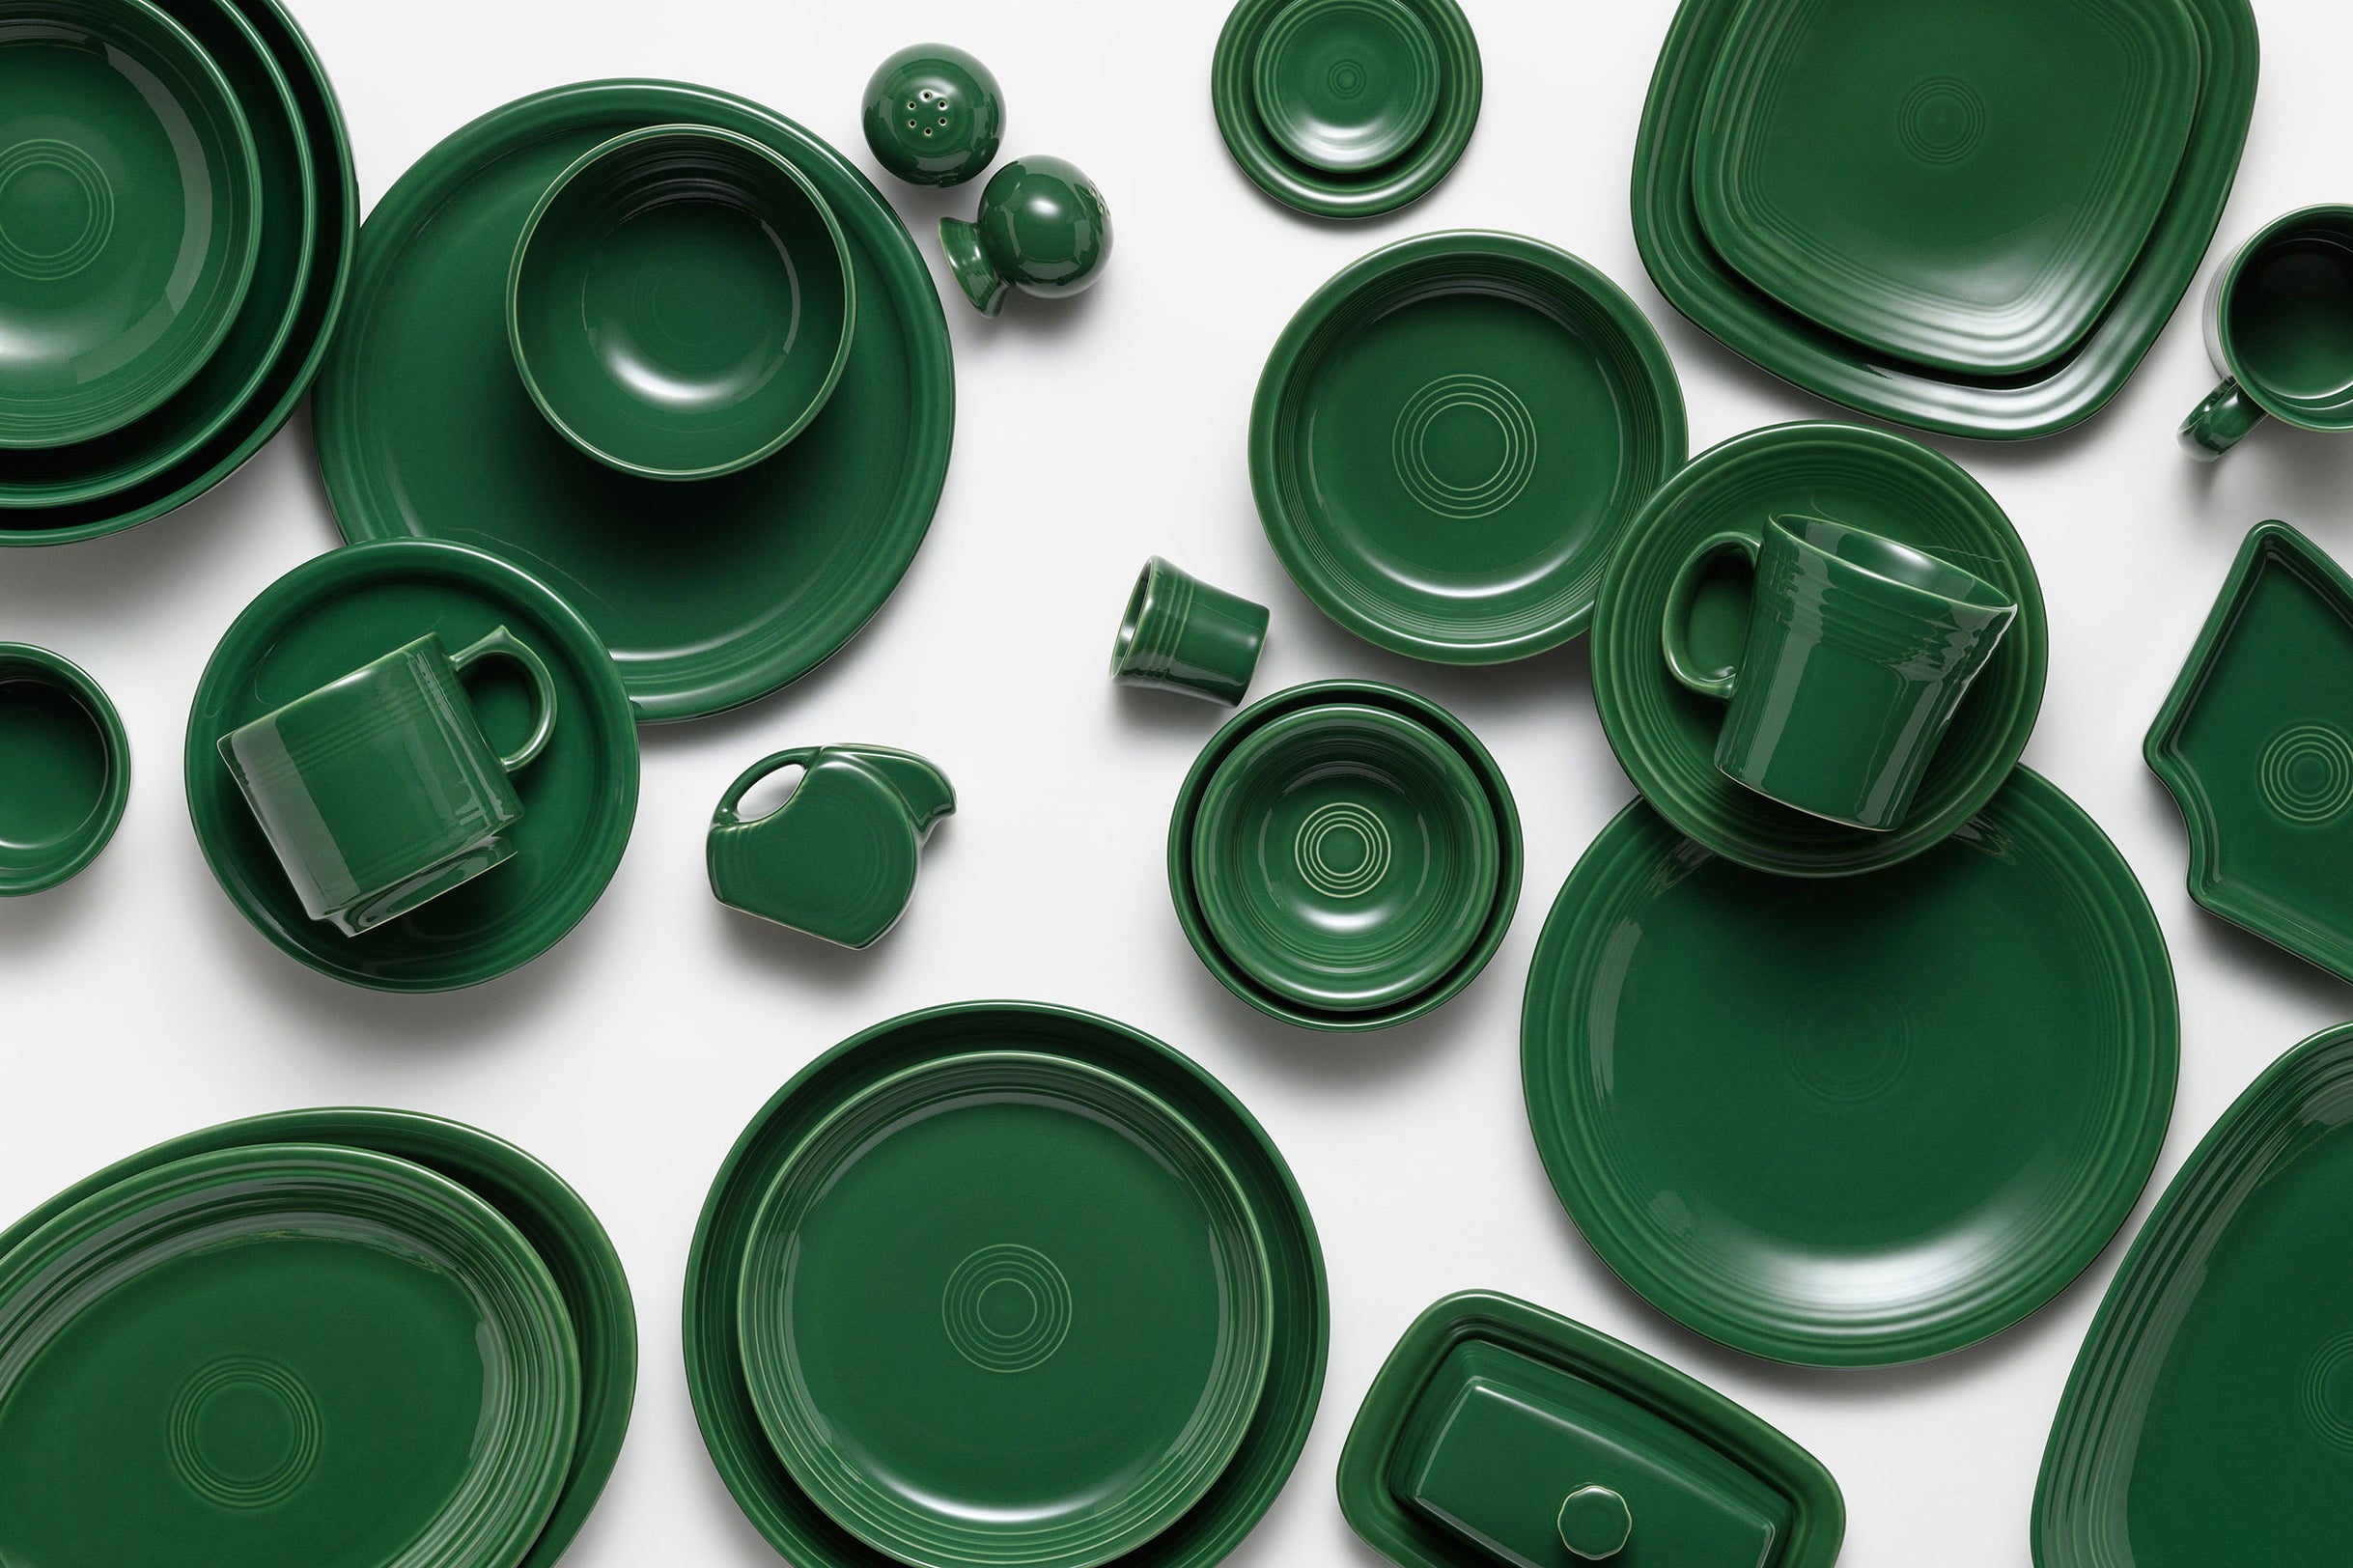 Jade Flat Lay of all Fiestaware products